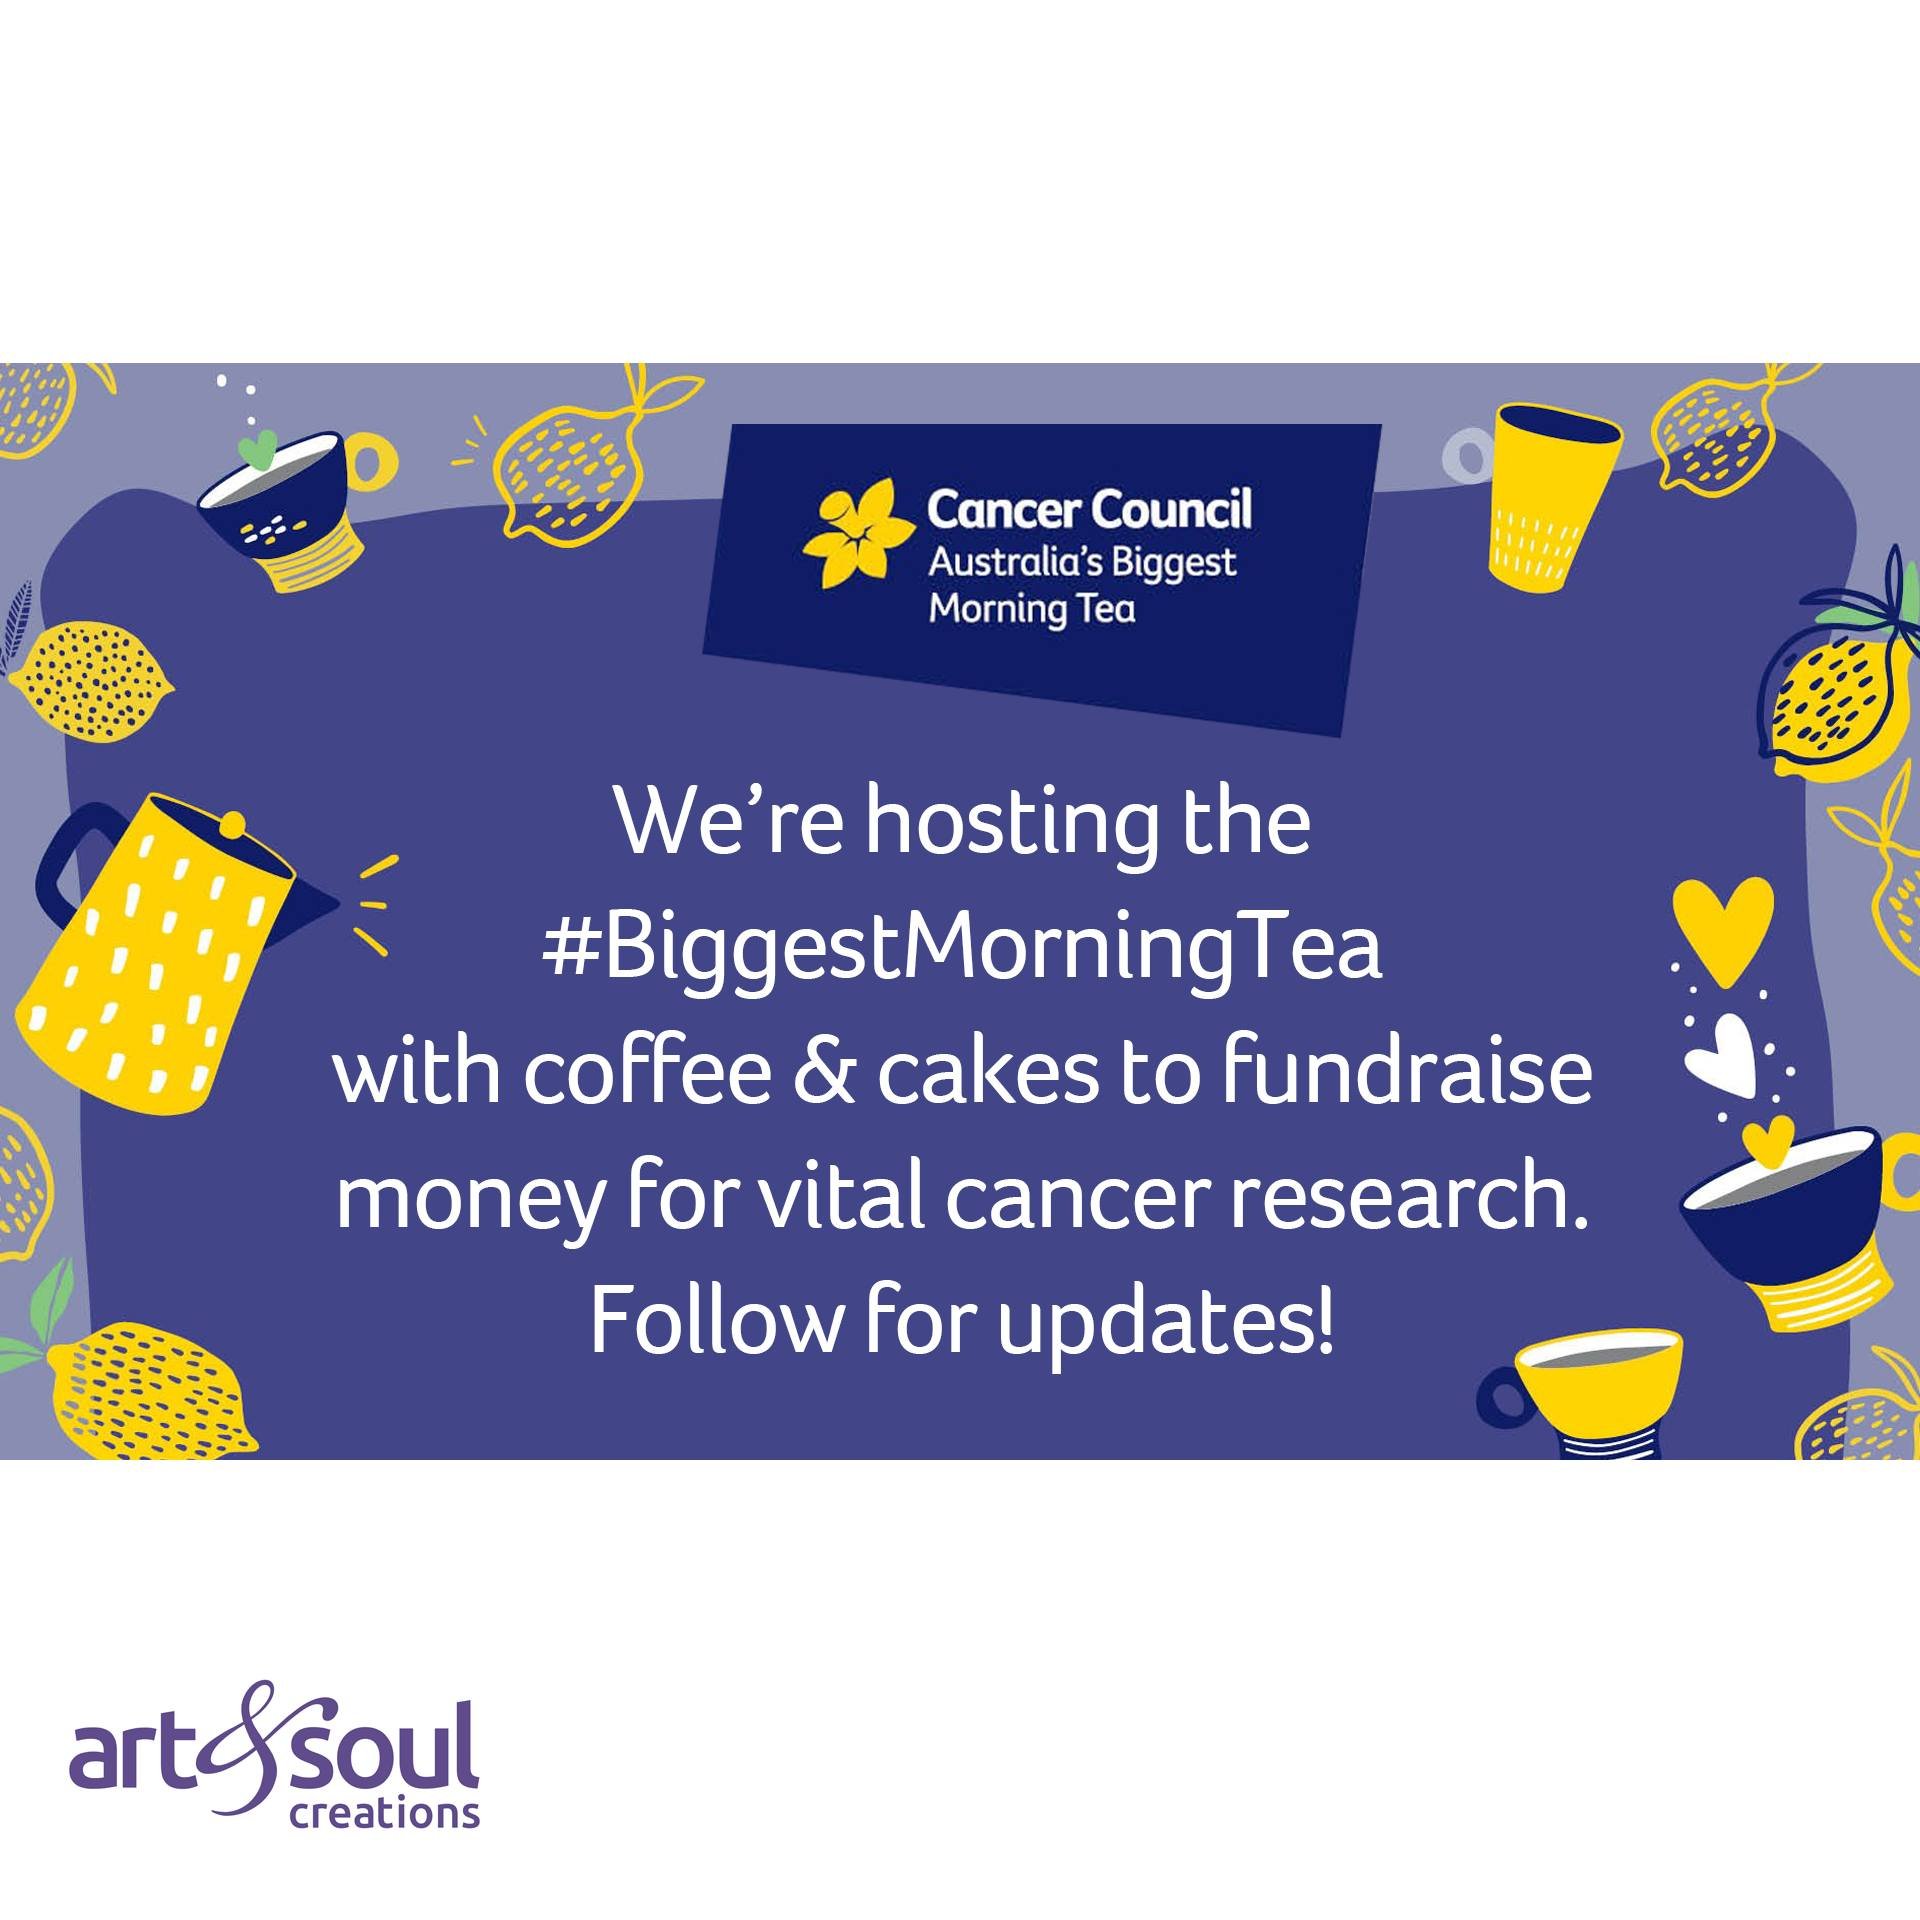 #Donation link in bio: https://lnkd.in/gWrsVinz 
Enjoying a cuppa &amp; cakes for a good cause.🎗️

#BiggestMorningTea #CancerCouncil #Fundraising